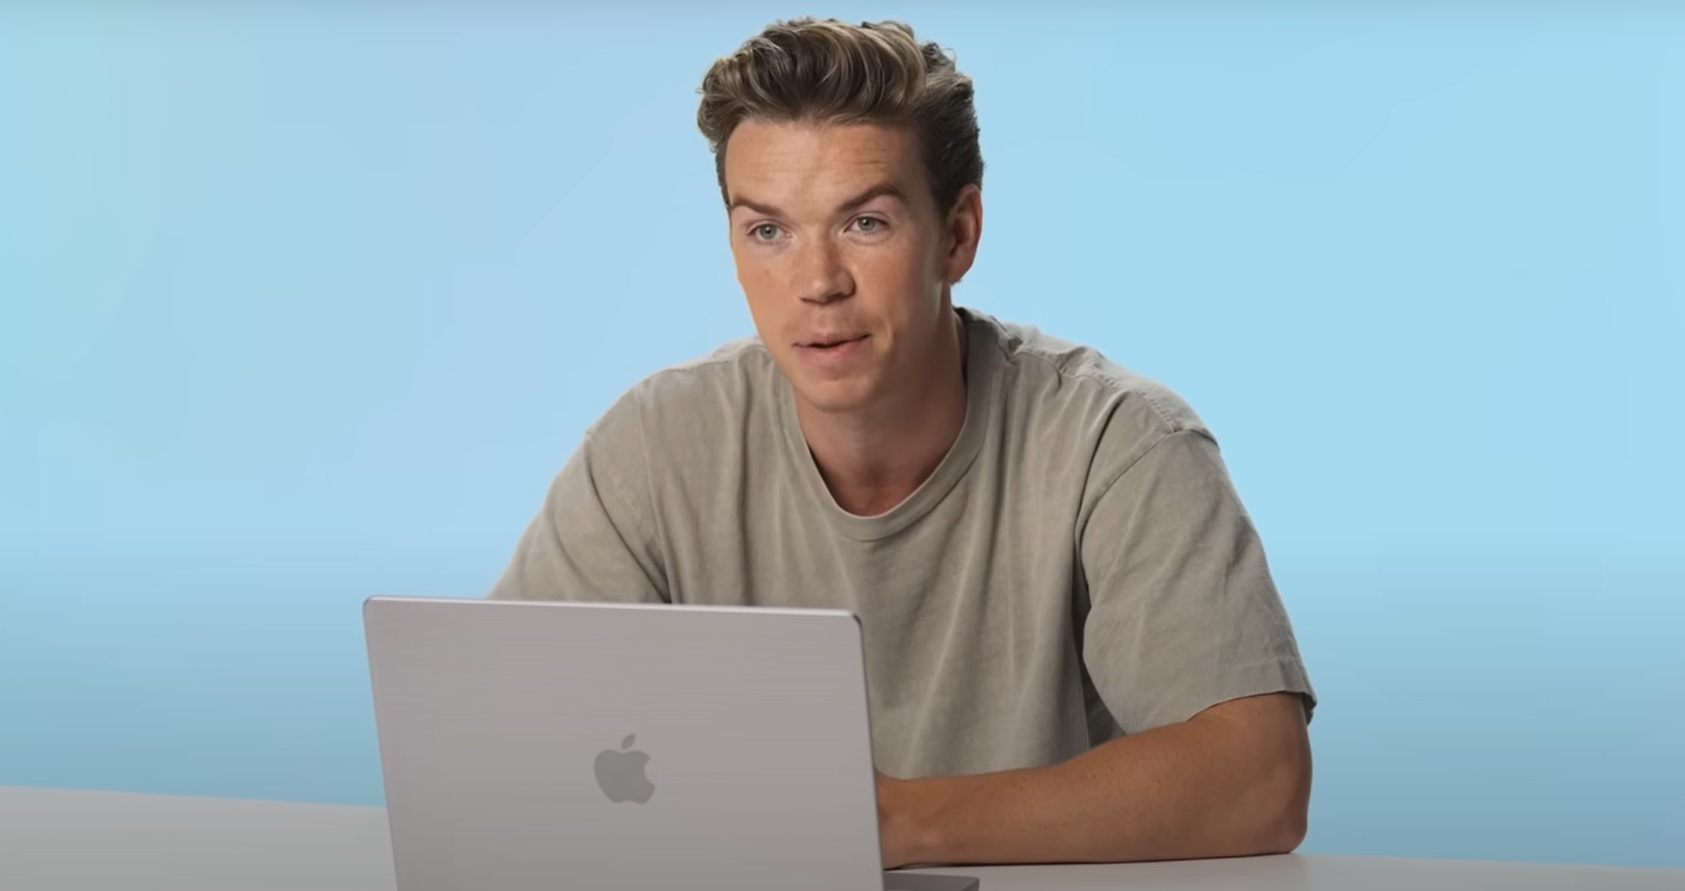 Will Poulter Reveals His Reason for Dressing Up As Sid from "Toy Story" and It's "Heartbreaking"